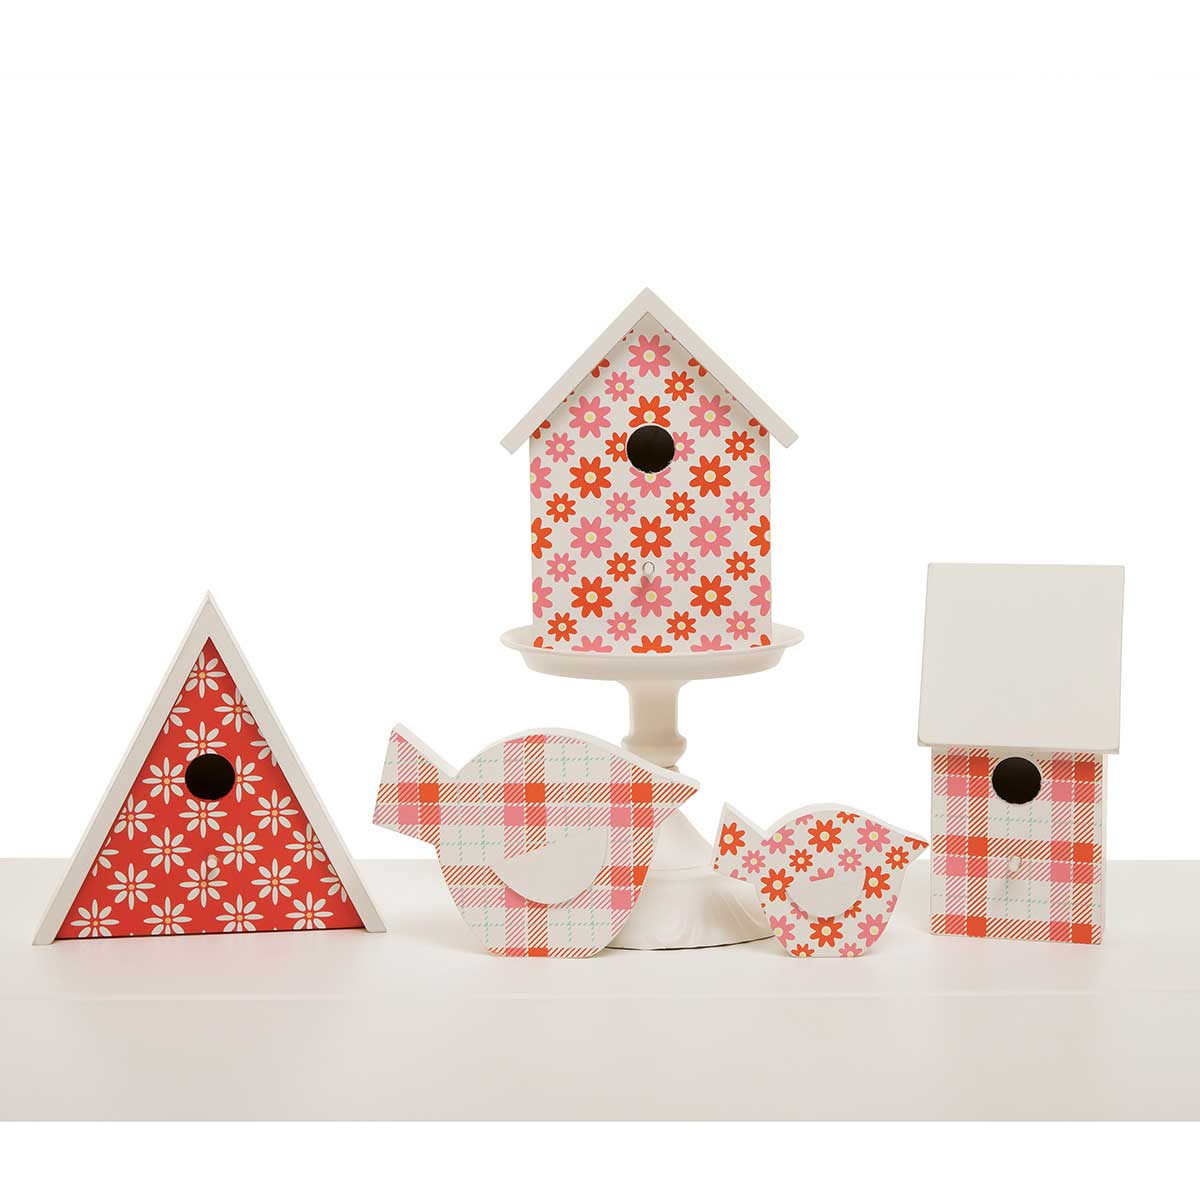 CORAL FAIR A-FRAME WOOD BIRDHOUSE SIT-A-BOUT CORAL/WHITE